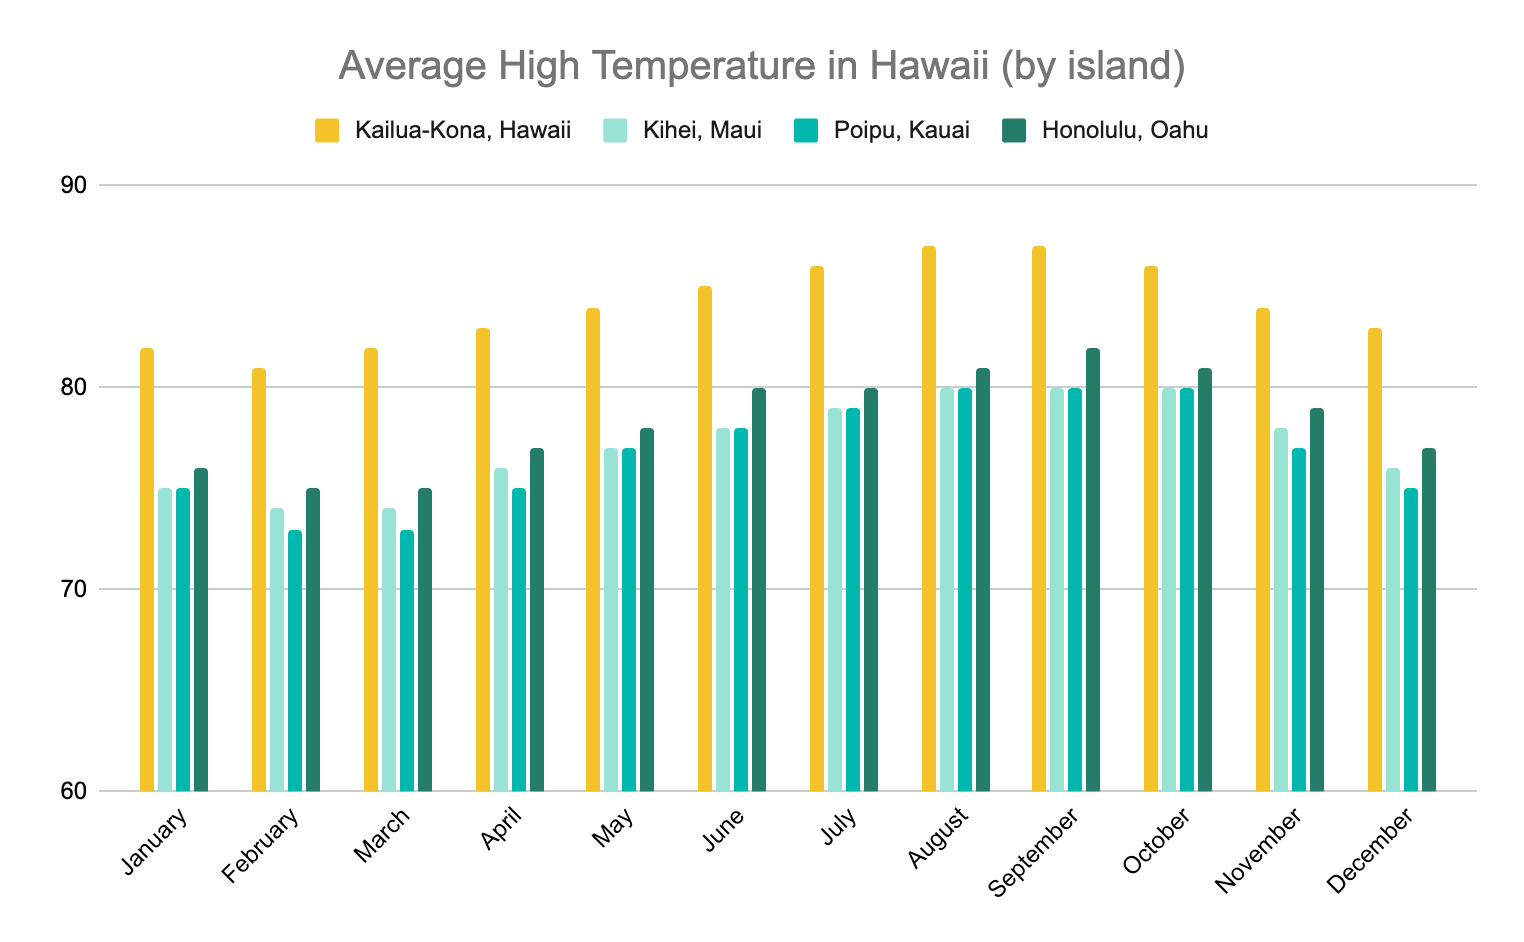 Graph depicting average high temperatures by island and month in degrees Fahrenheit, with the Big Island being consistently hotter, and Maui the most mild.